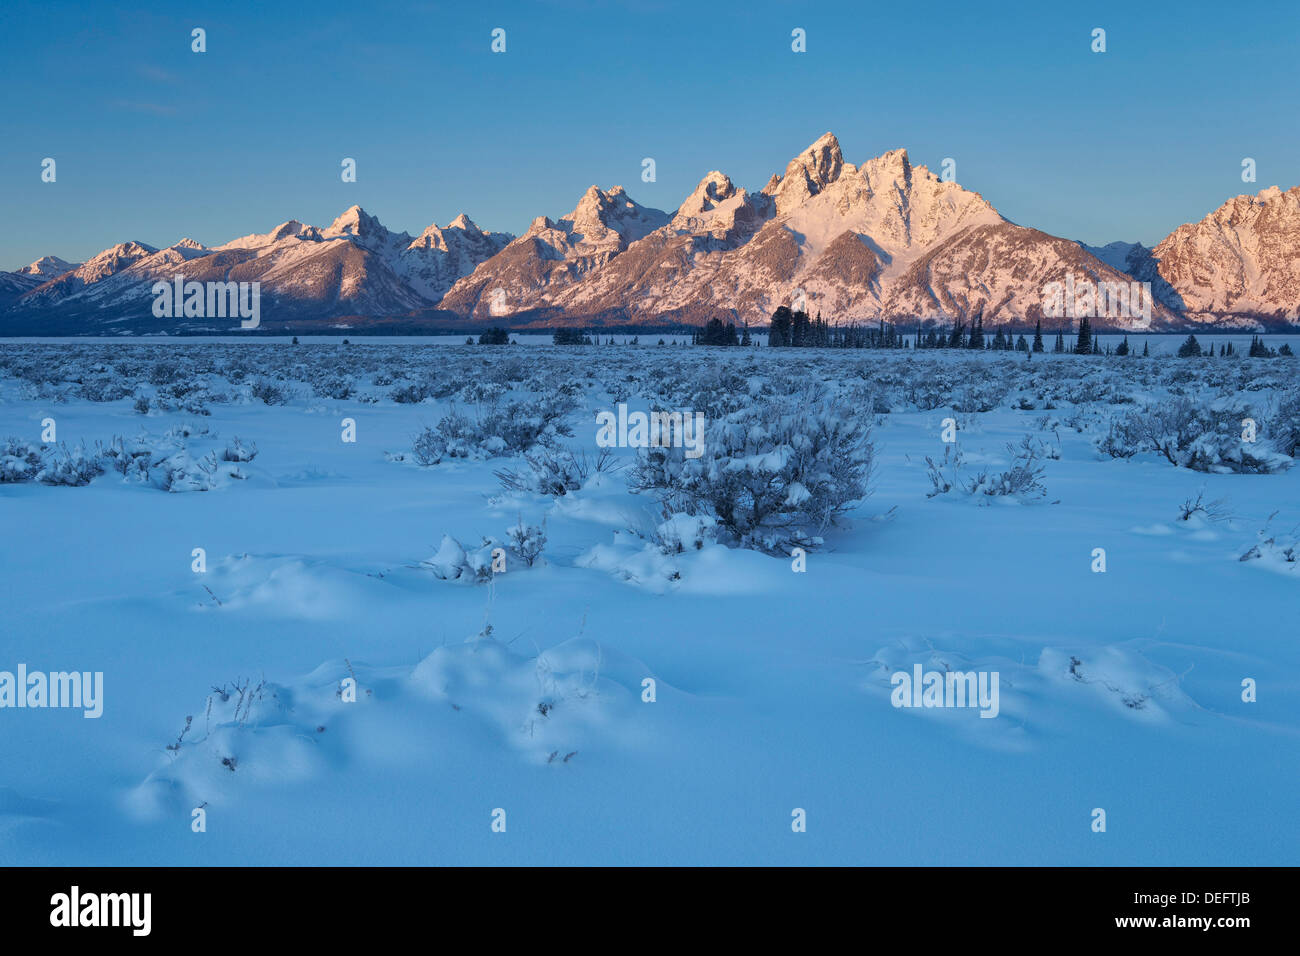 The Teton Range at first light after a fresh snow, Grand Teton National Park, Wyoming, United States of America, North America Stock Photo